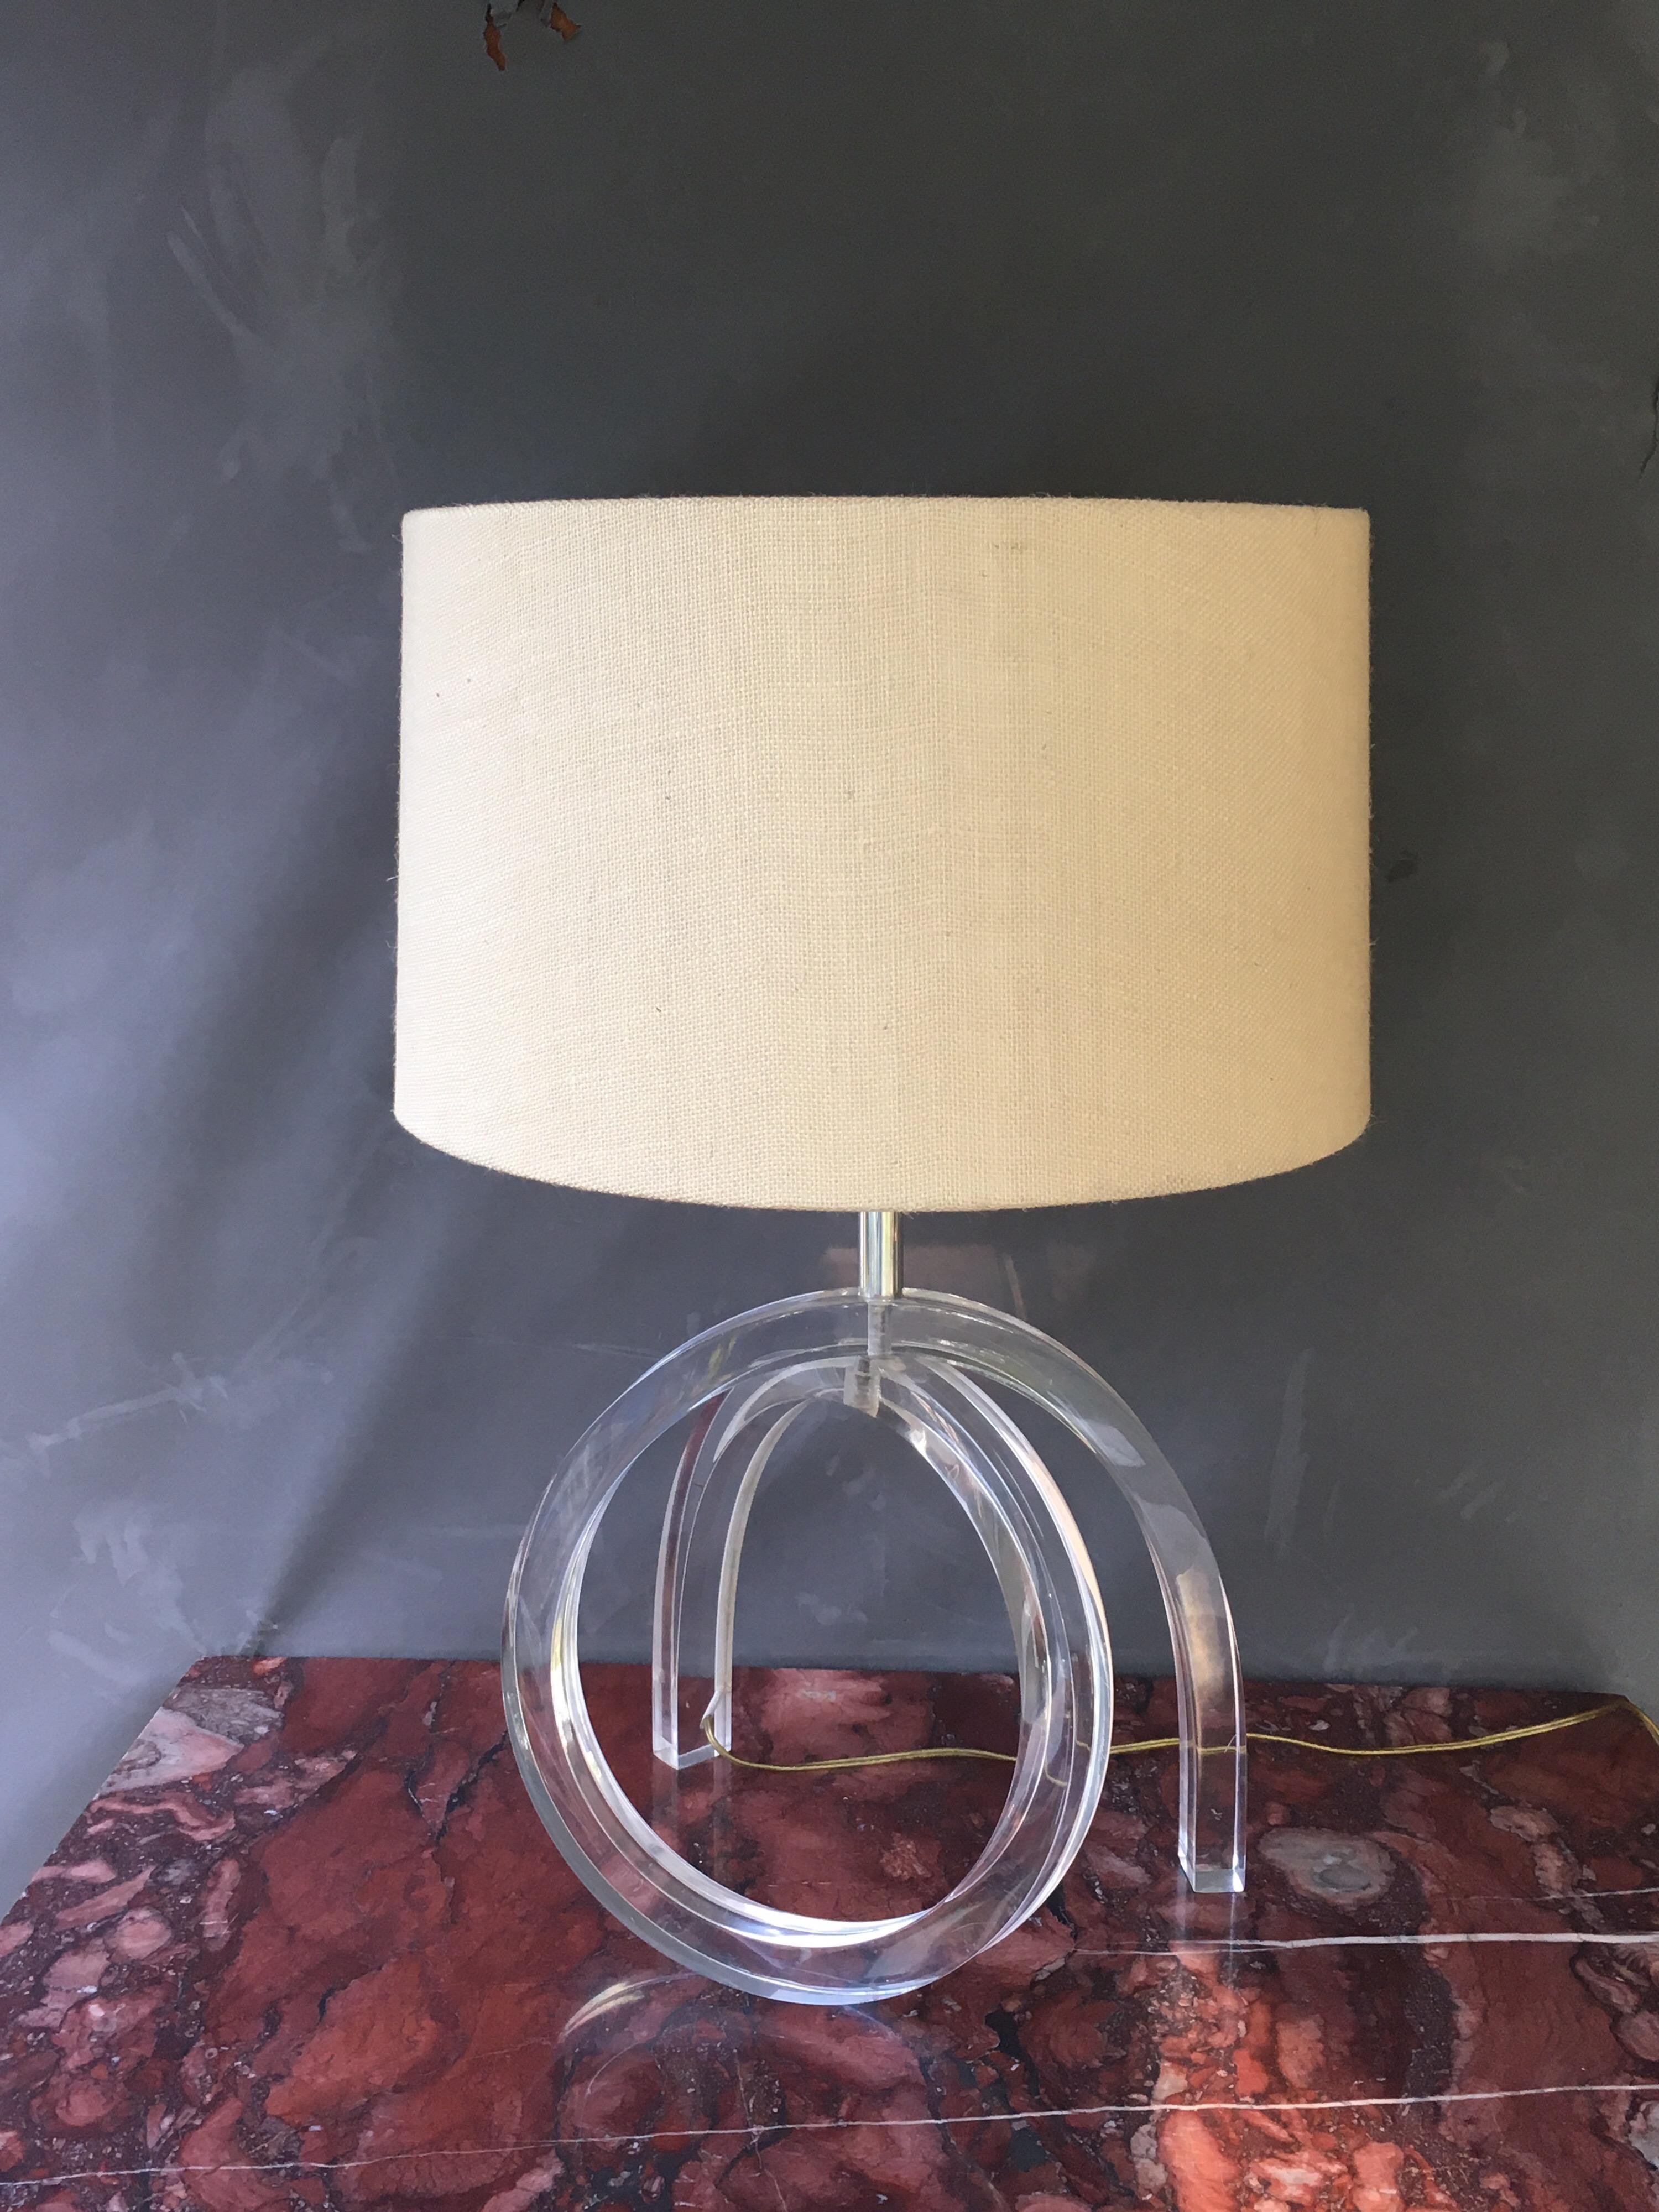 American Acrylic Sculptural Lamp, 20th Century For Sale